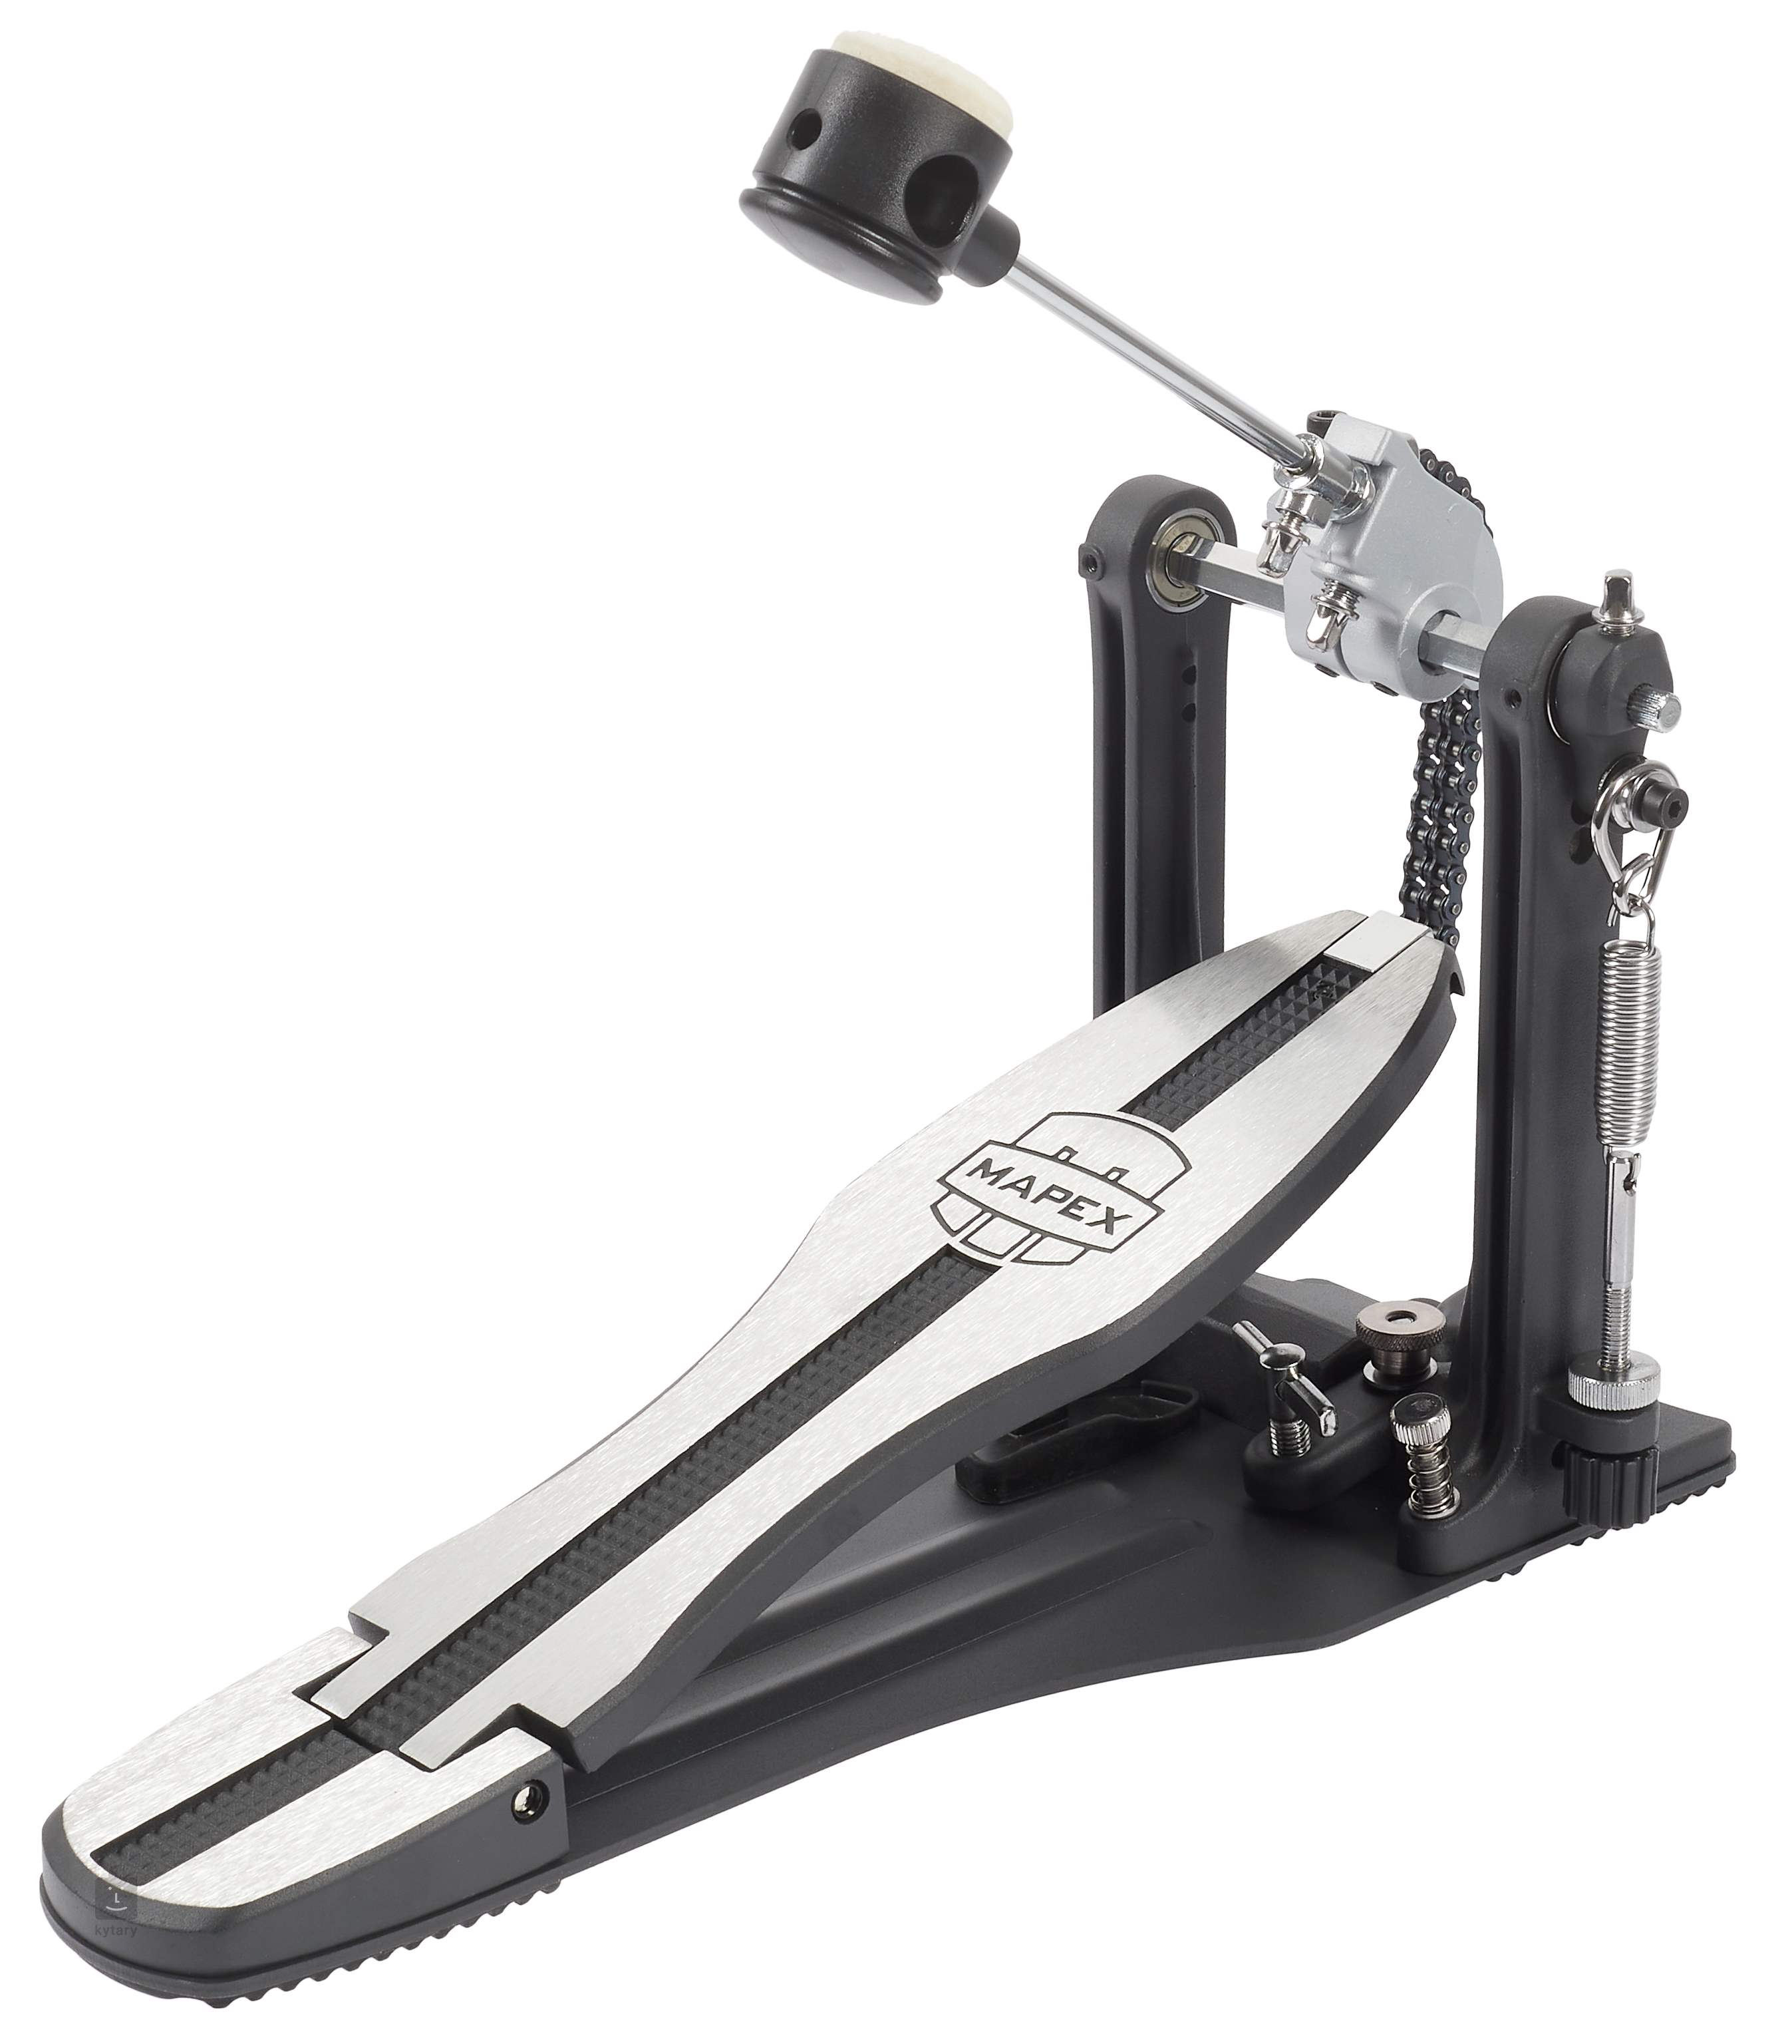 MAPEX P600 Bass Drum Pedal | Kytary.ie